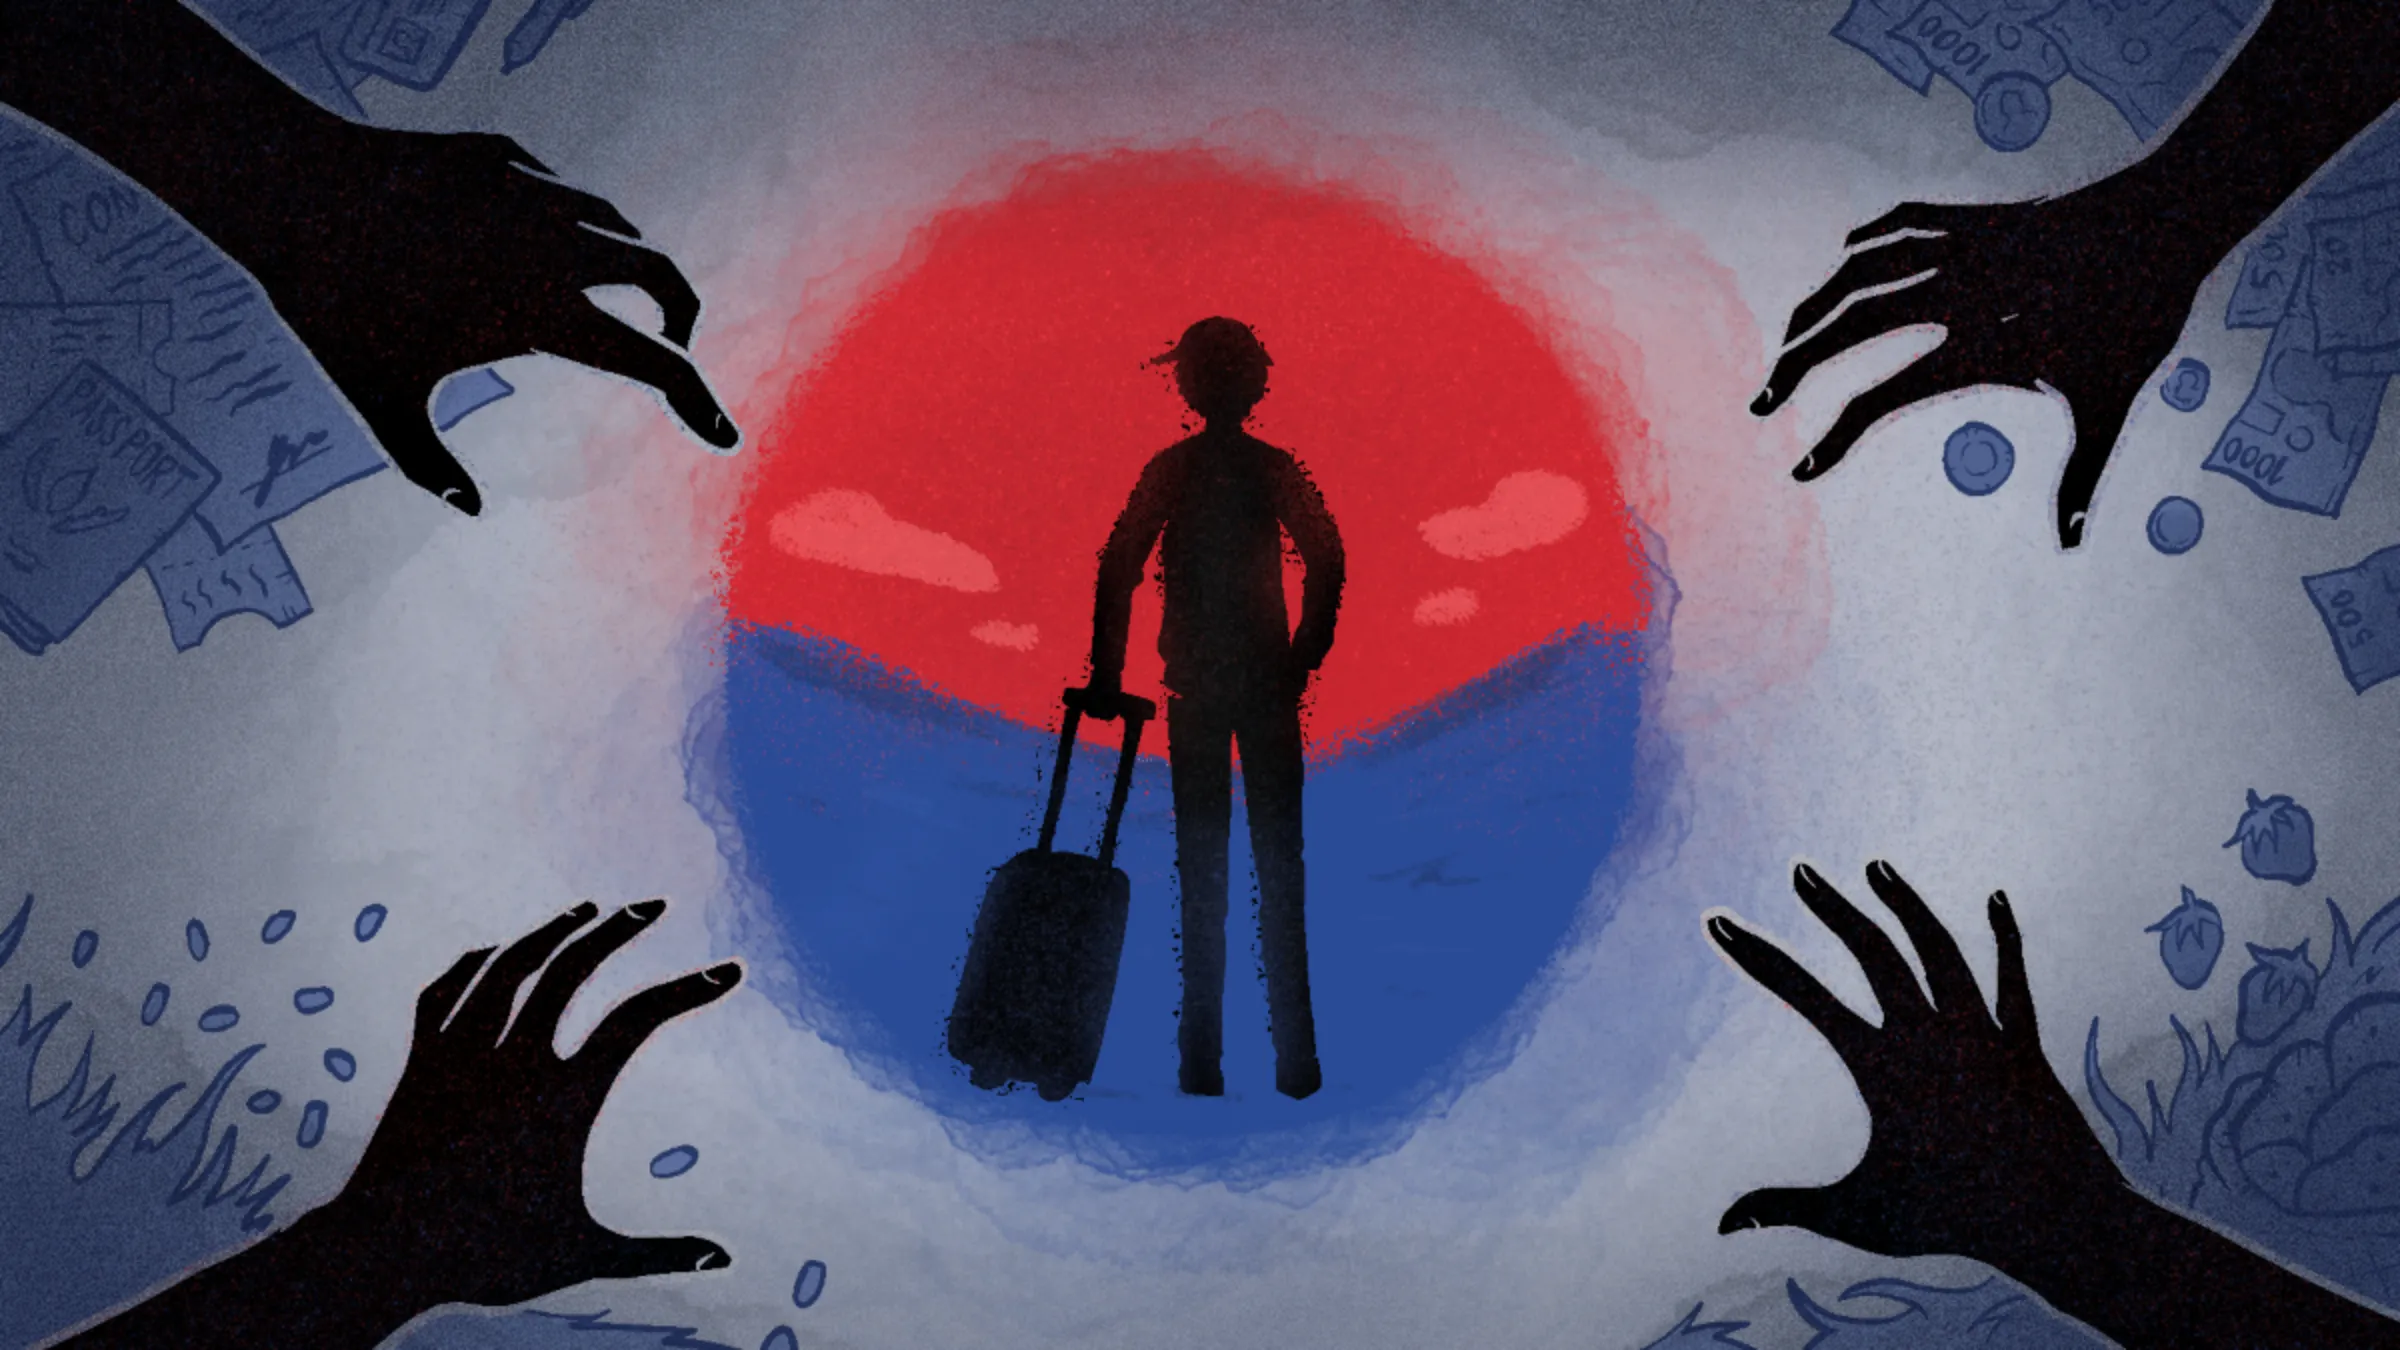 A Context probe into a migrant worker scheme between the Philippines and South Korea has unearthed systemic abuse and widespread worker disquiet. Thomson Reuters Foundation/Marian Hukom